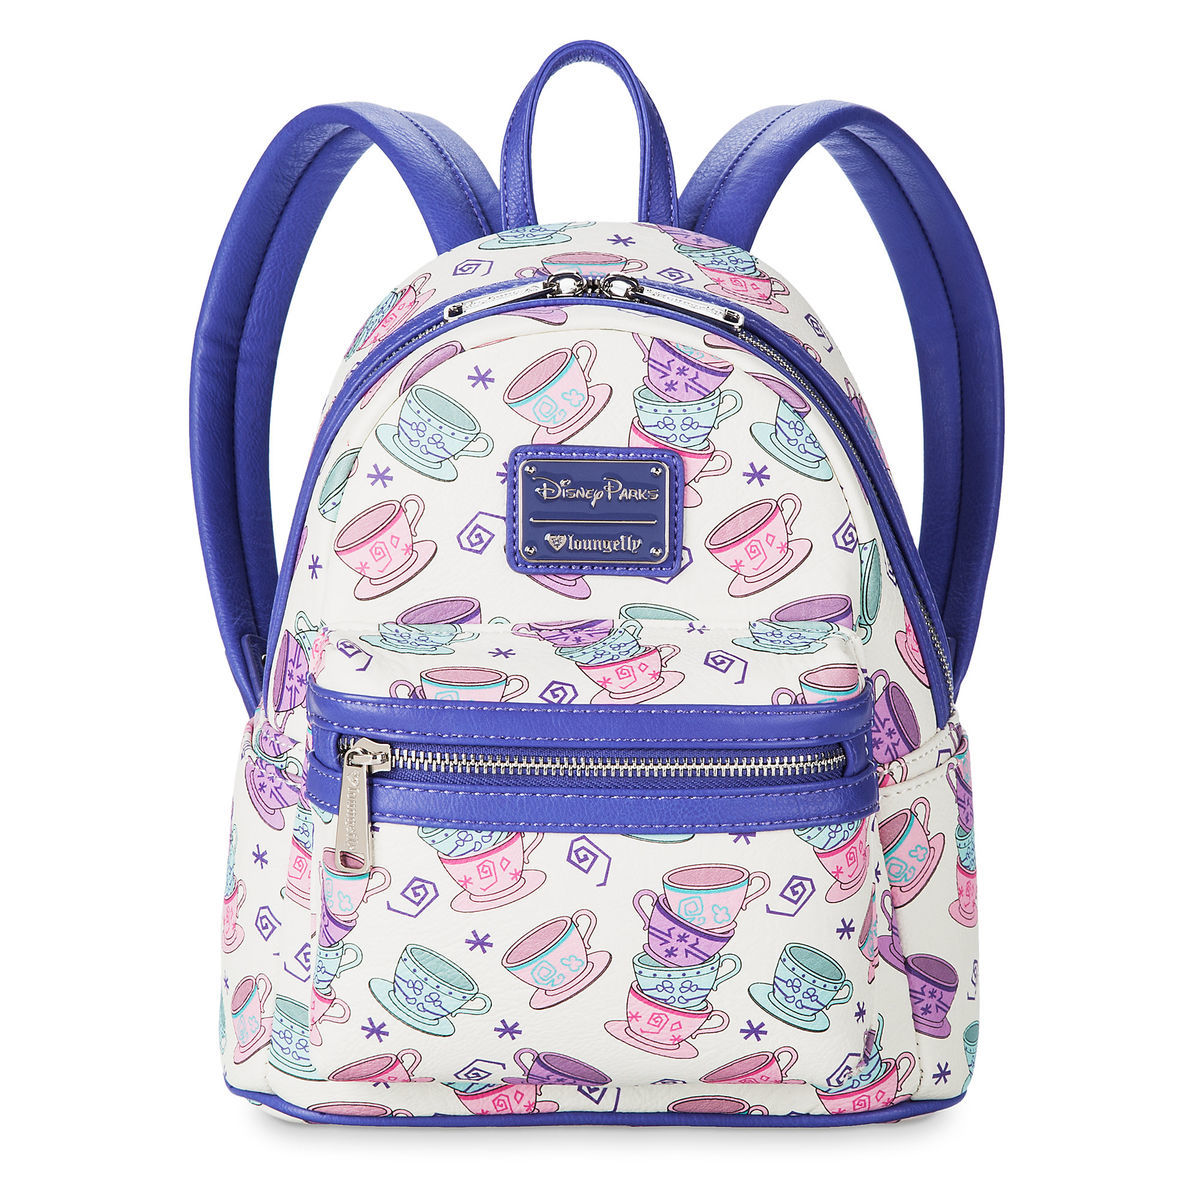 Disney Mad Tea Party Mini Backpack by Loungefly New with Tags